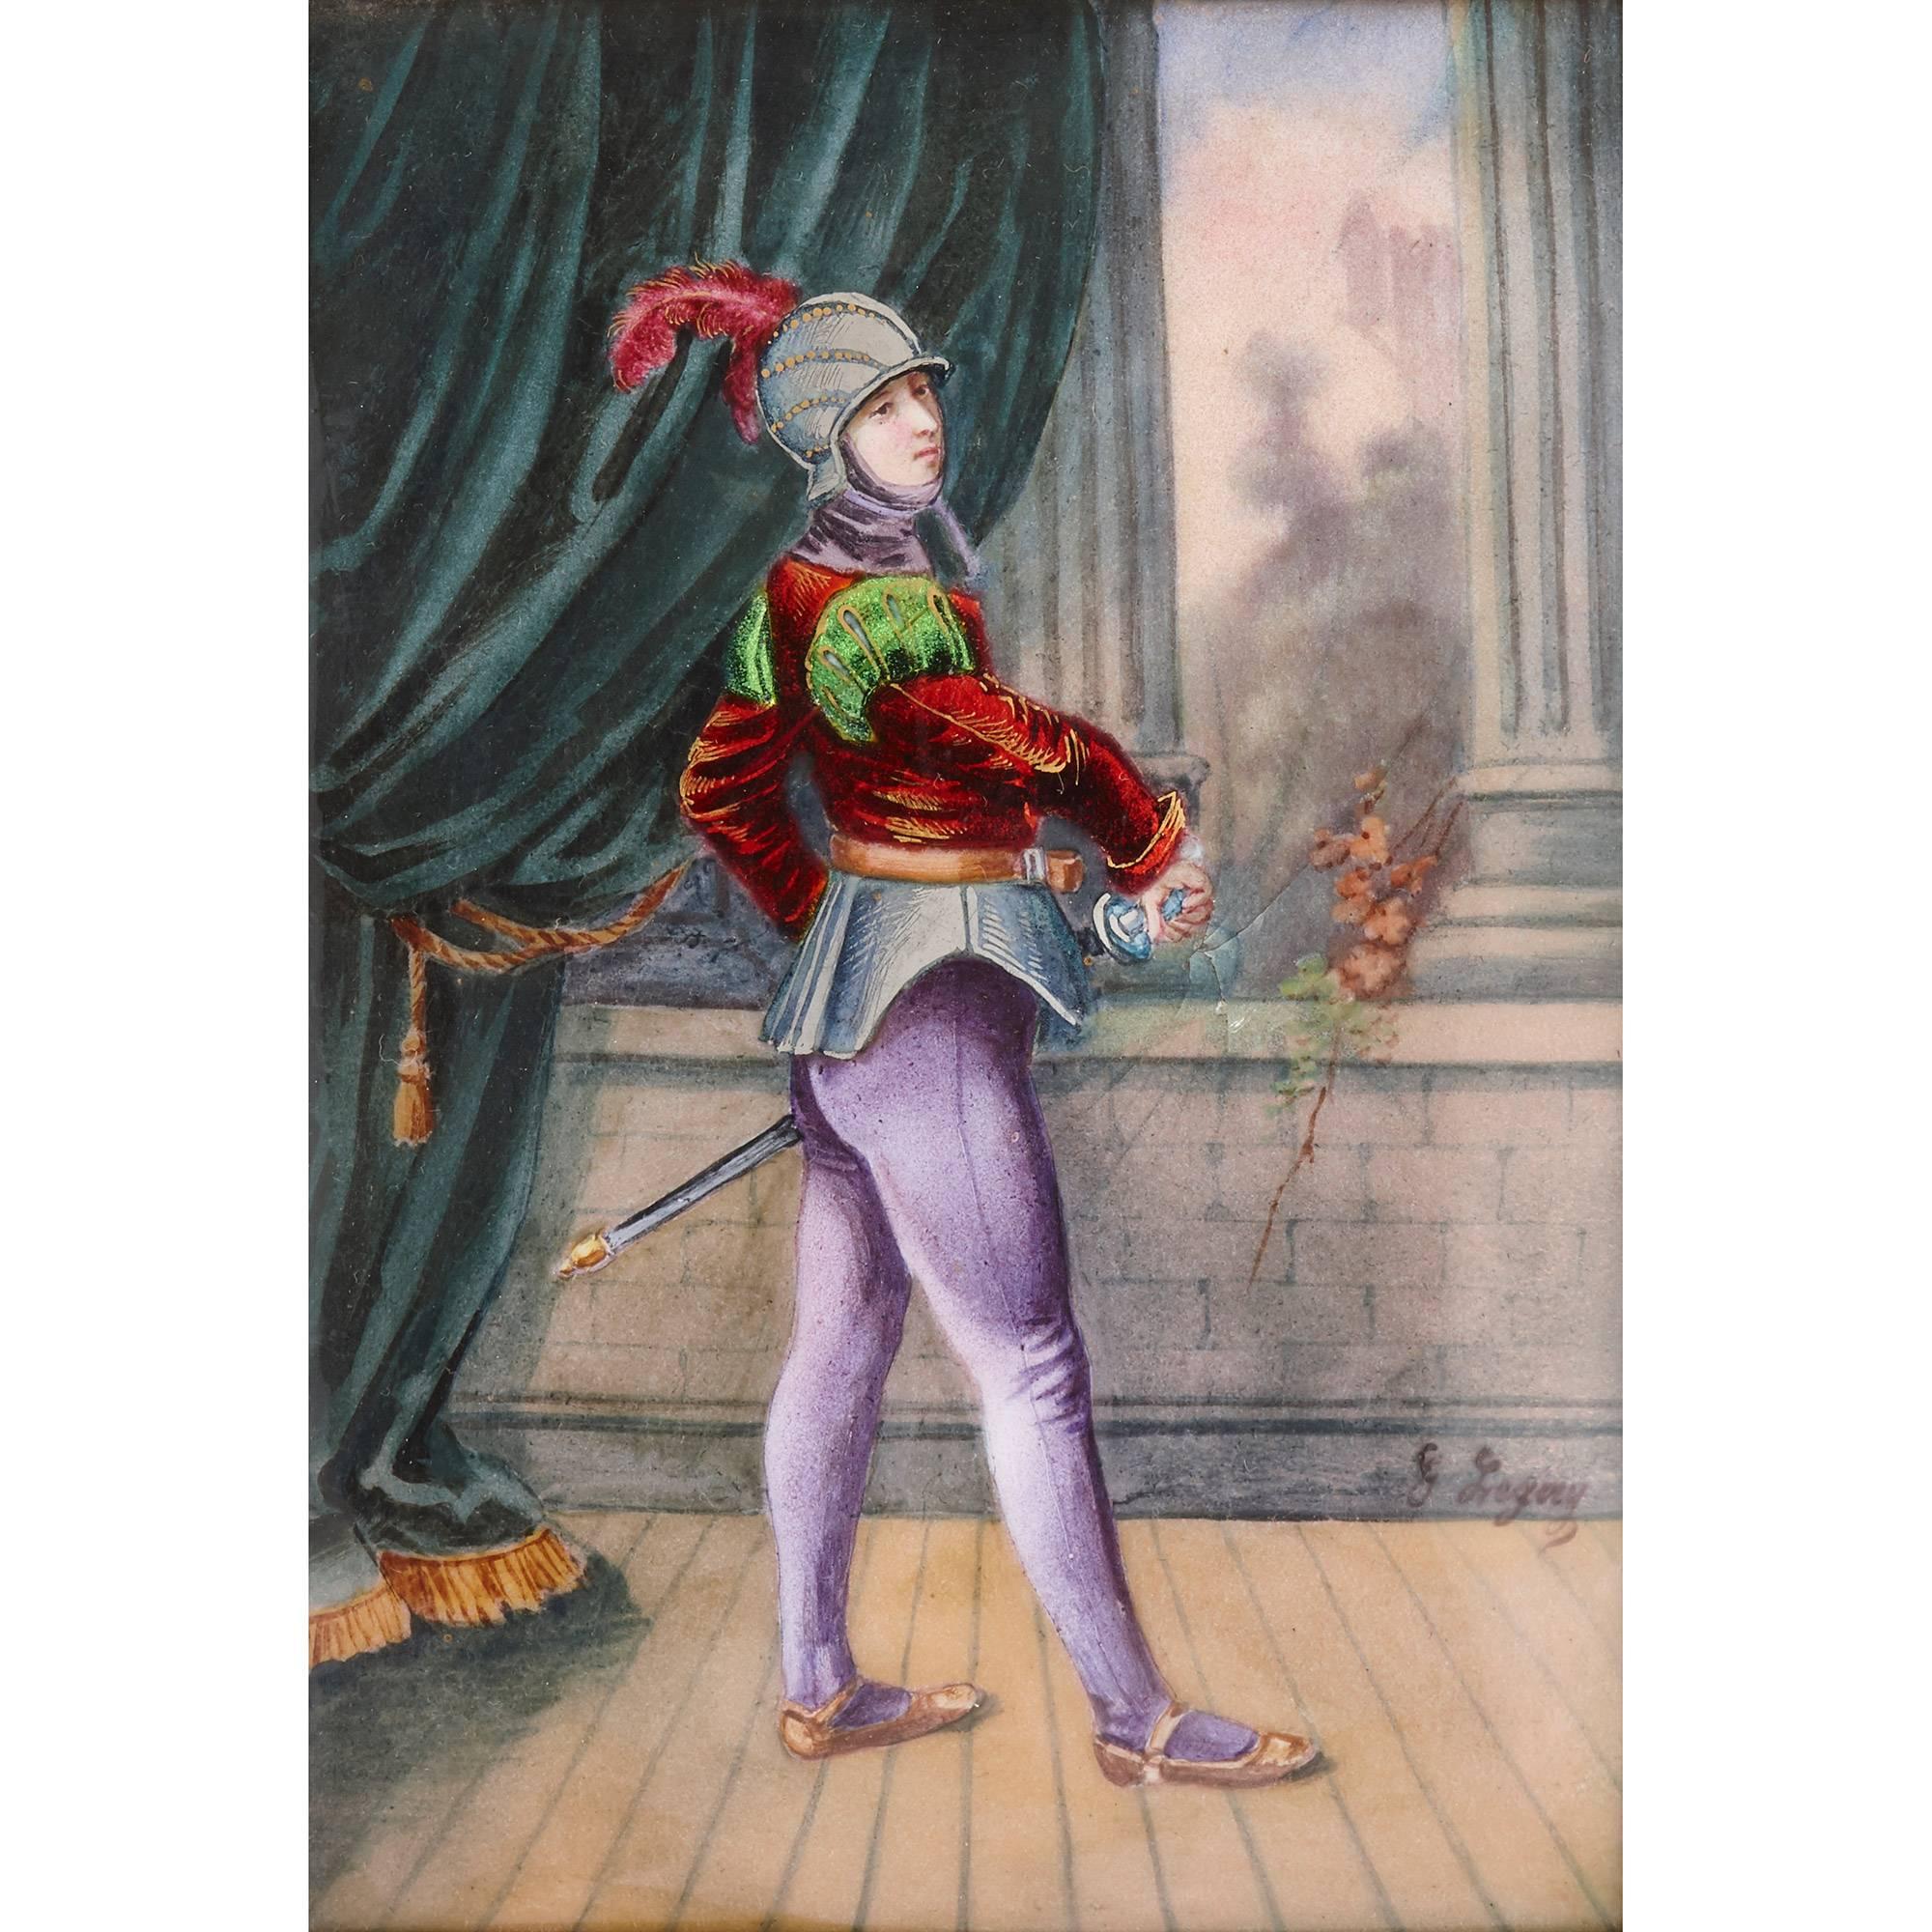 This beautiful Limoges enamel plaque depicts a knight in full armour. He is portrayed turning towards the viewer, as though he is about to unsheathe his sword. The knight stands before classical white stone fluted columns and heavy velvet curtains,